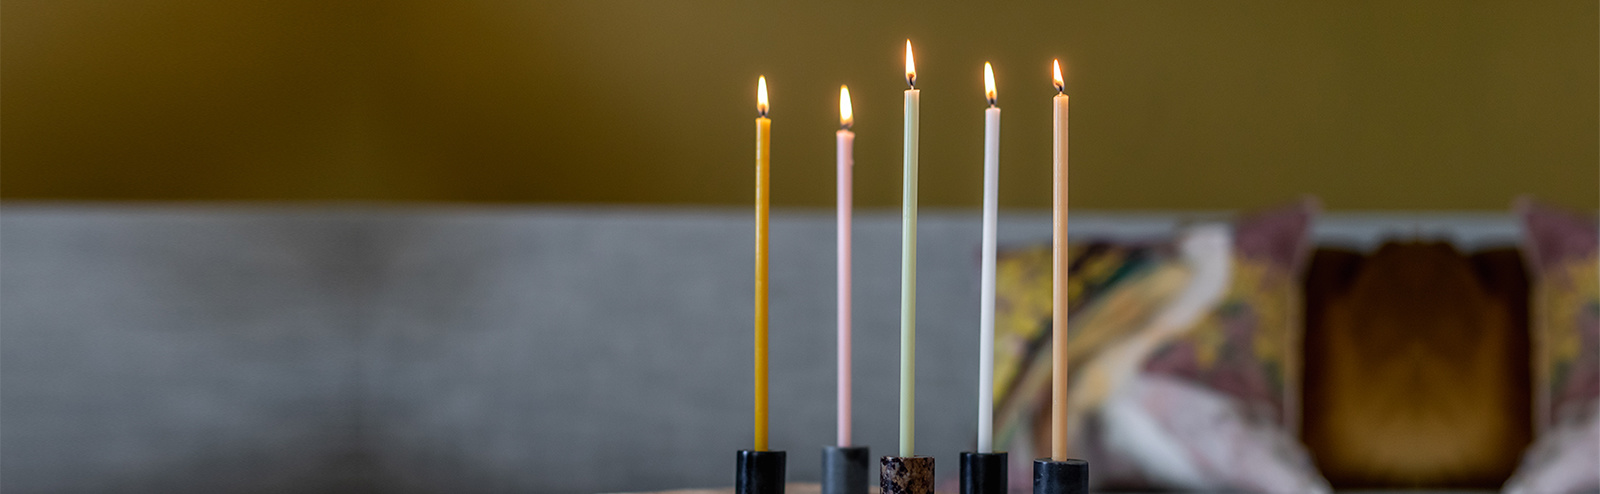 Thin taper candles with perfume scent